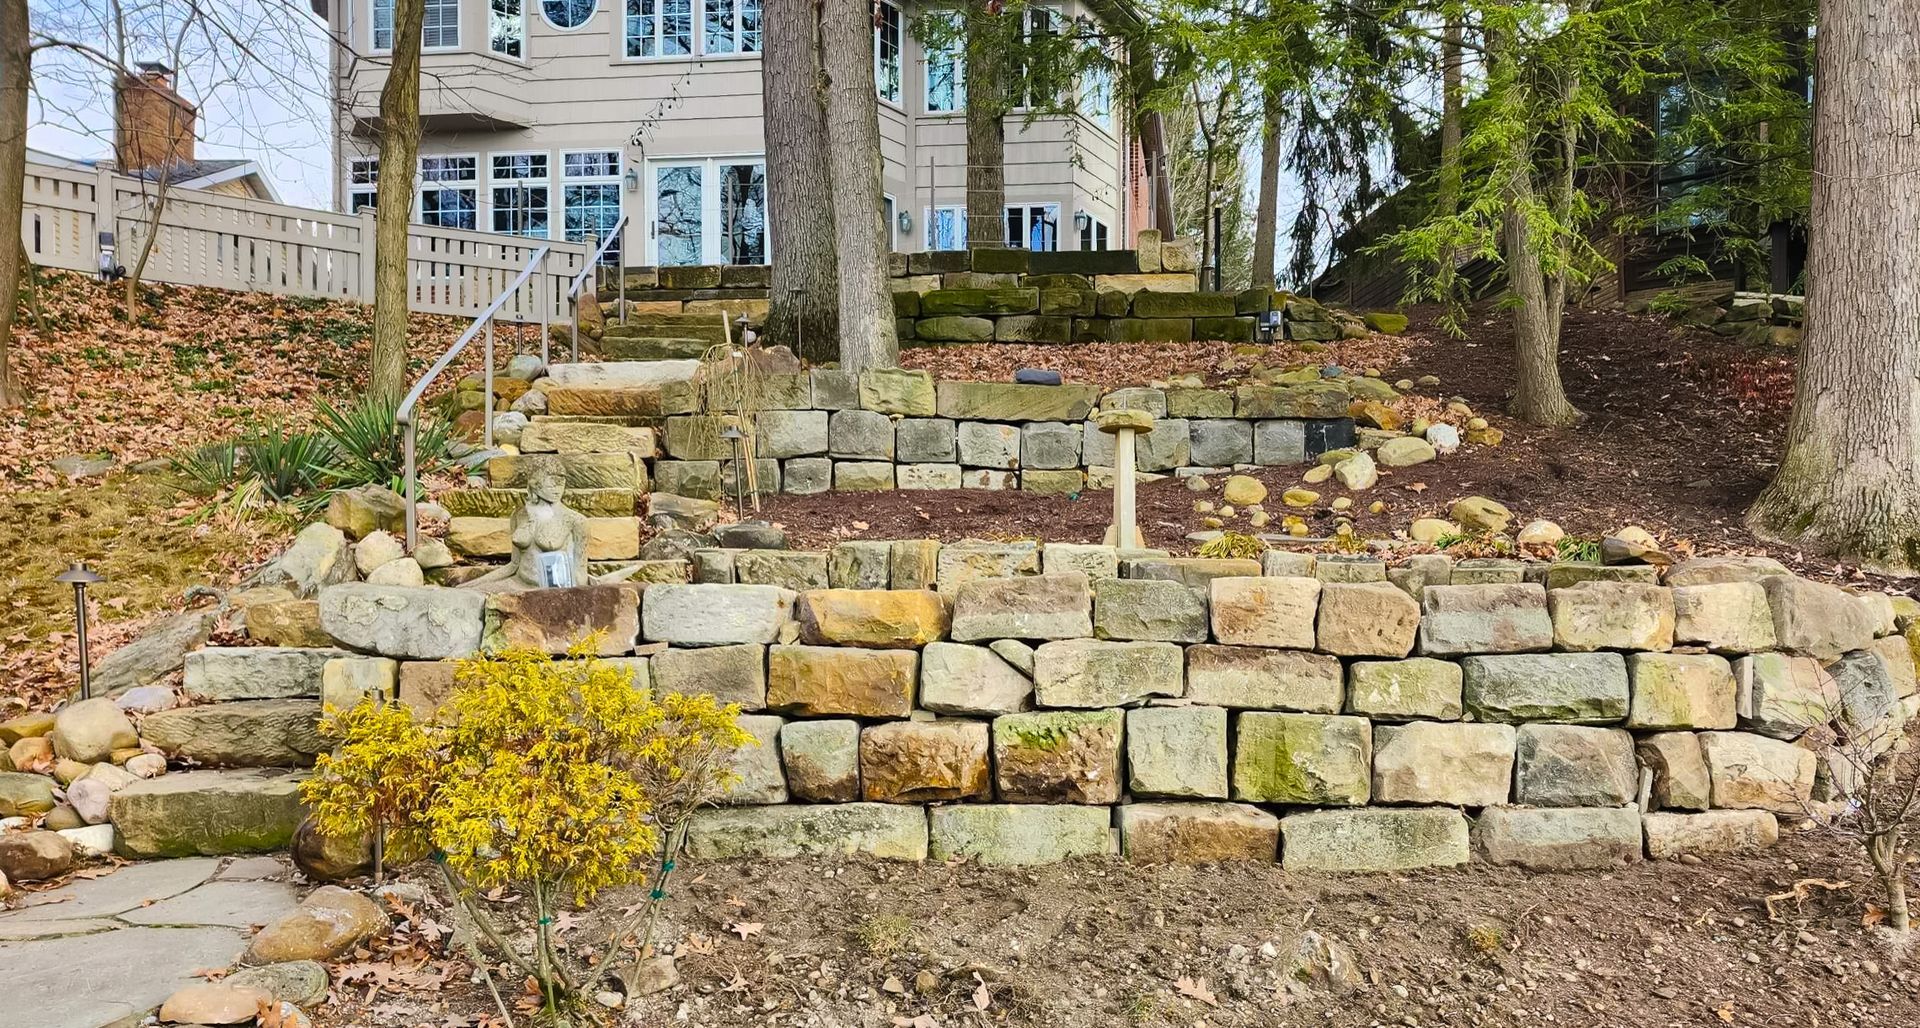 A stone wall in a yard with a house in the background.